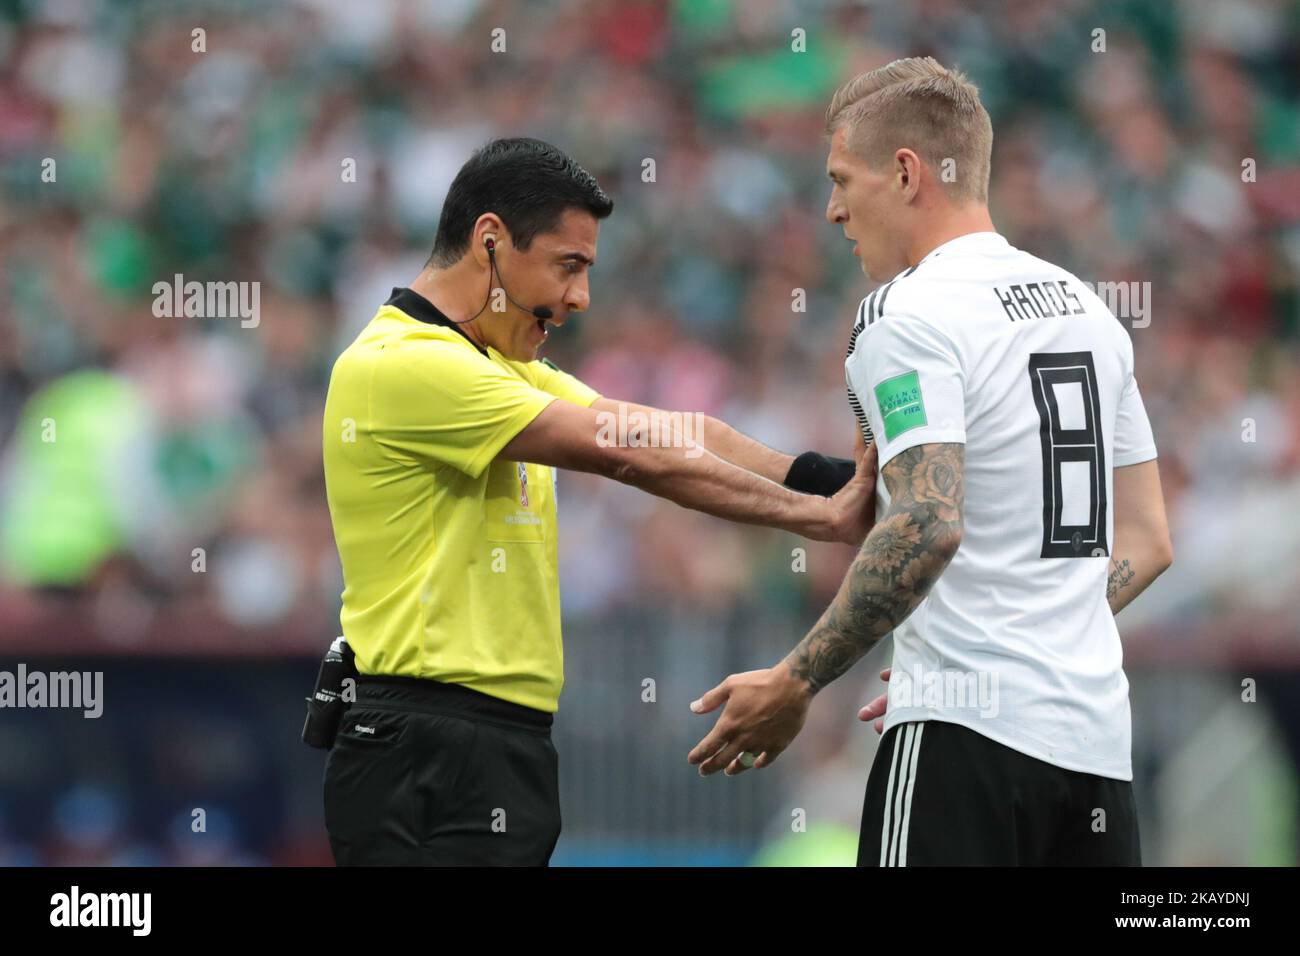 Referee Alireza Faghani and midfielder Toni Kroos of Germany National team during the group F match between Germany and Mexico at the 2018 soccer World Cup at Luzhniki stadium in Moscow, Russia, Sunday, June 17, 2018. (Photo by Anatolij Medved/NurPhoto) Stock Photo